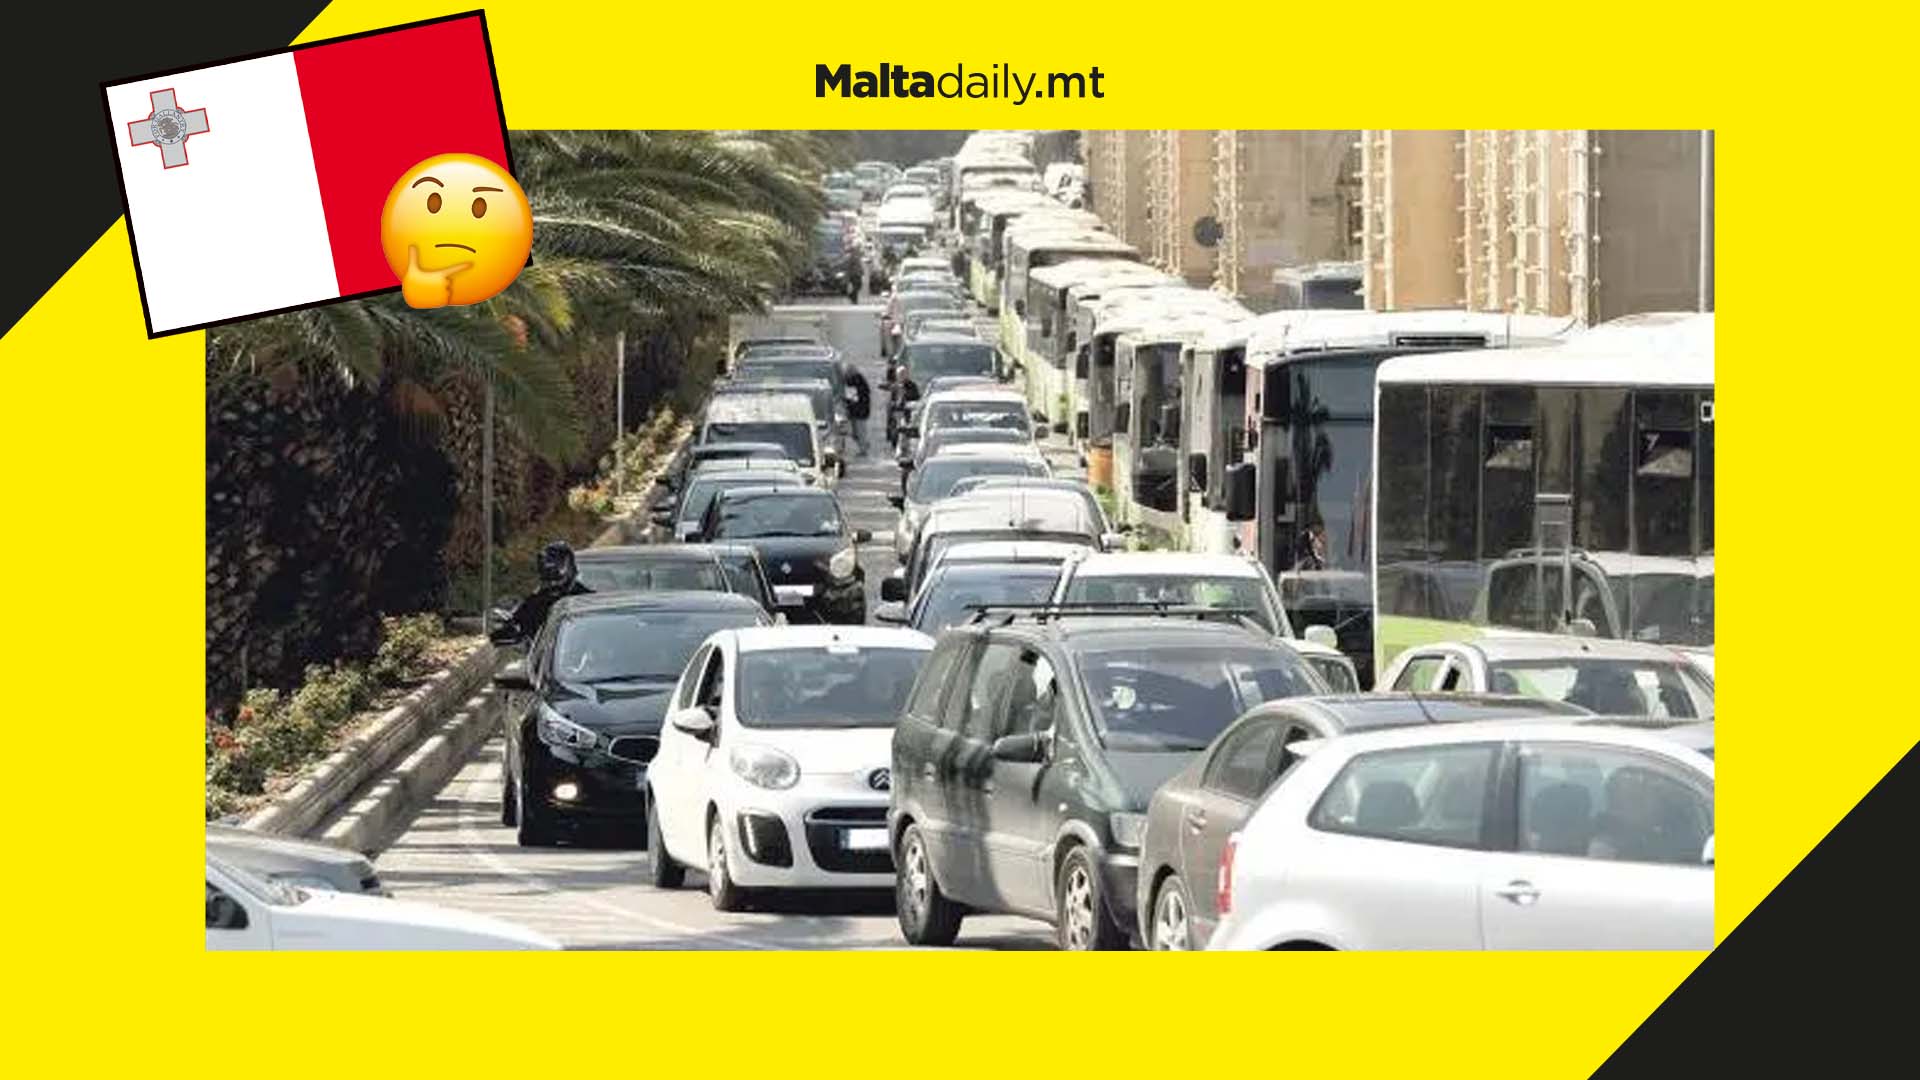 29 new vehicles issued onto Malta’s roads everyday